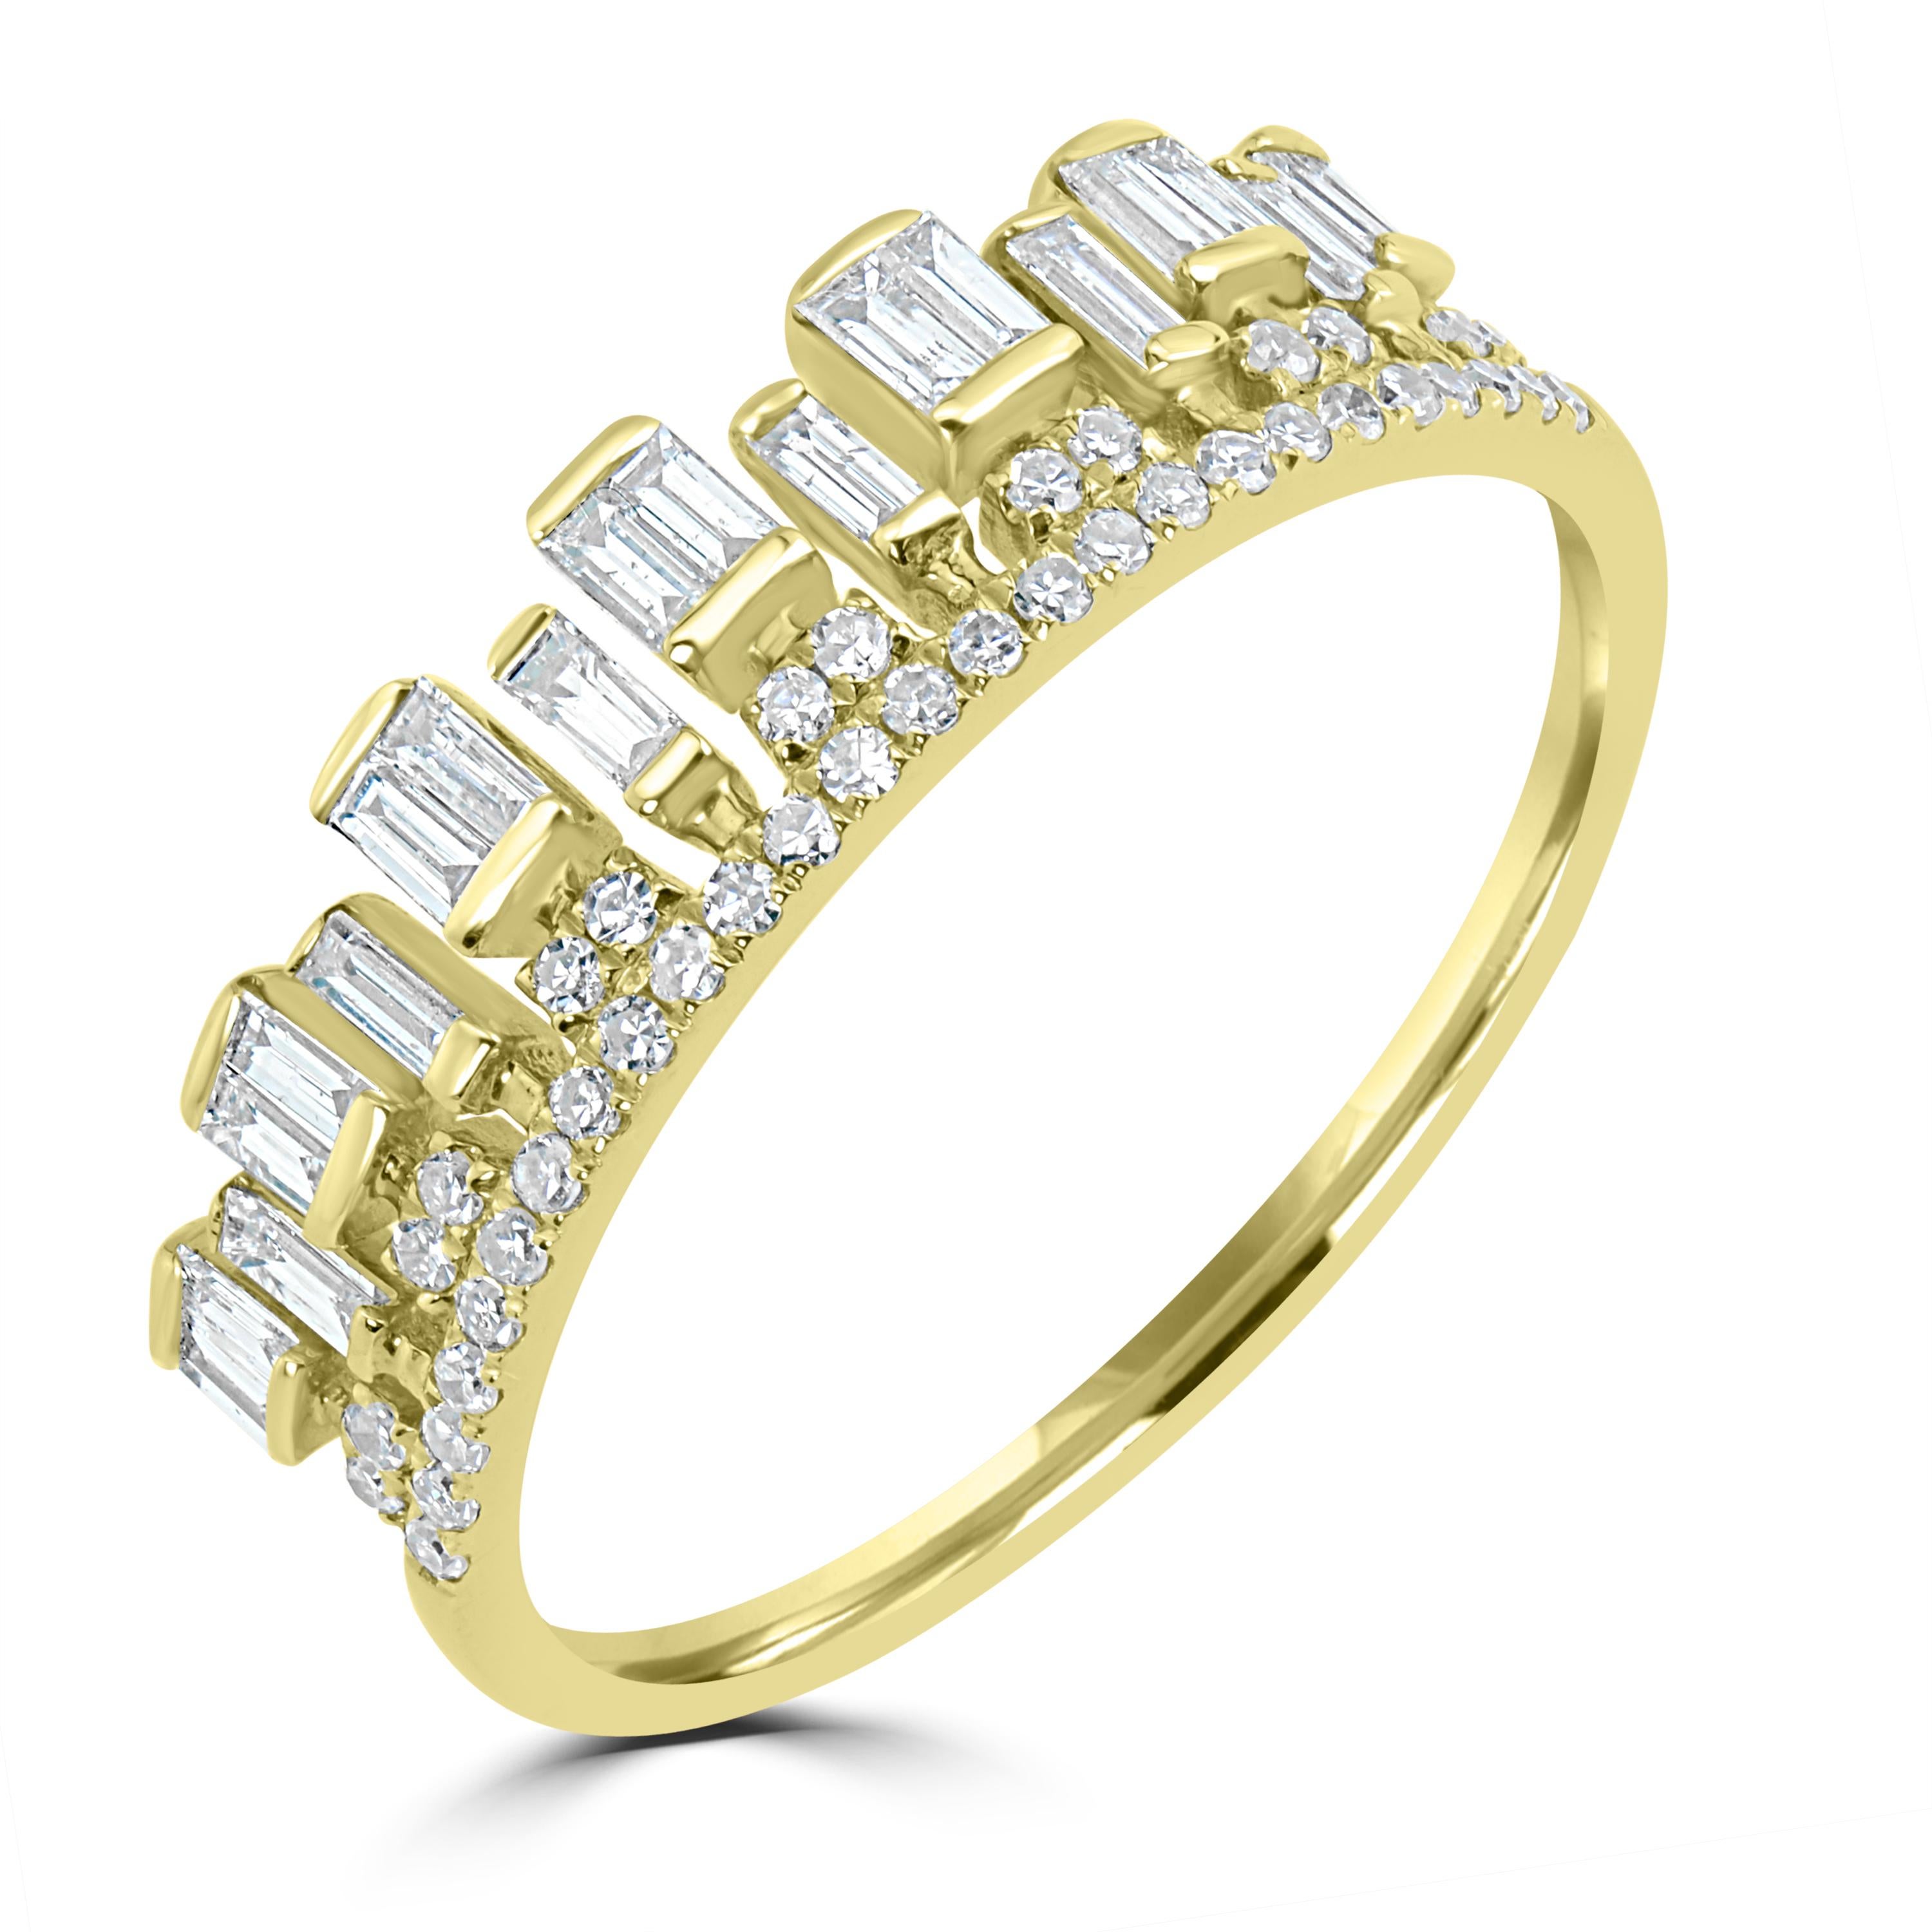 This Luxle beautiful and bold ring contains artfully embellished baguettes glimmering from a row of pave set round diamonds bestow an upscale look in 14K yellow gold.
Please follow the Luxury Jewels storefront to view the latest collections &